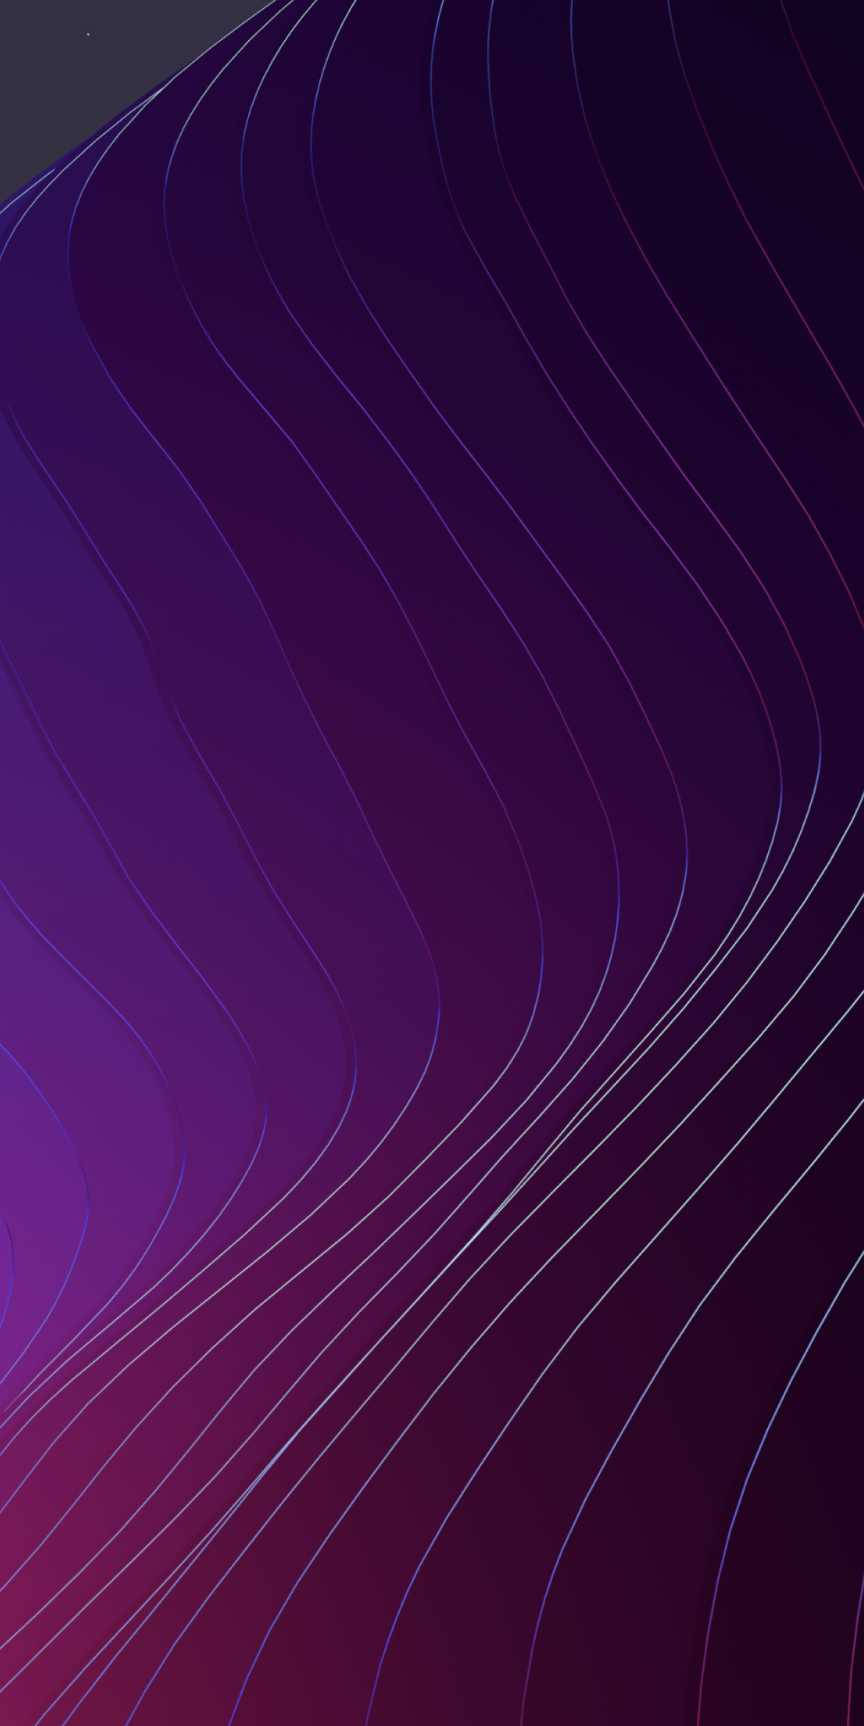 A Purple And Blue Background With A Wave Pattern